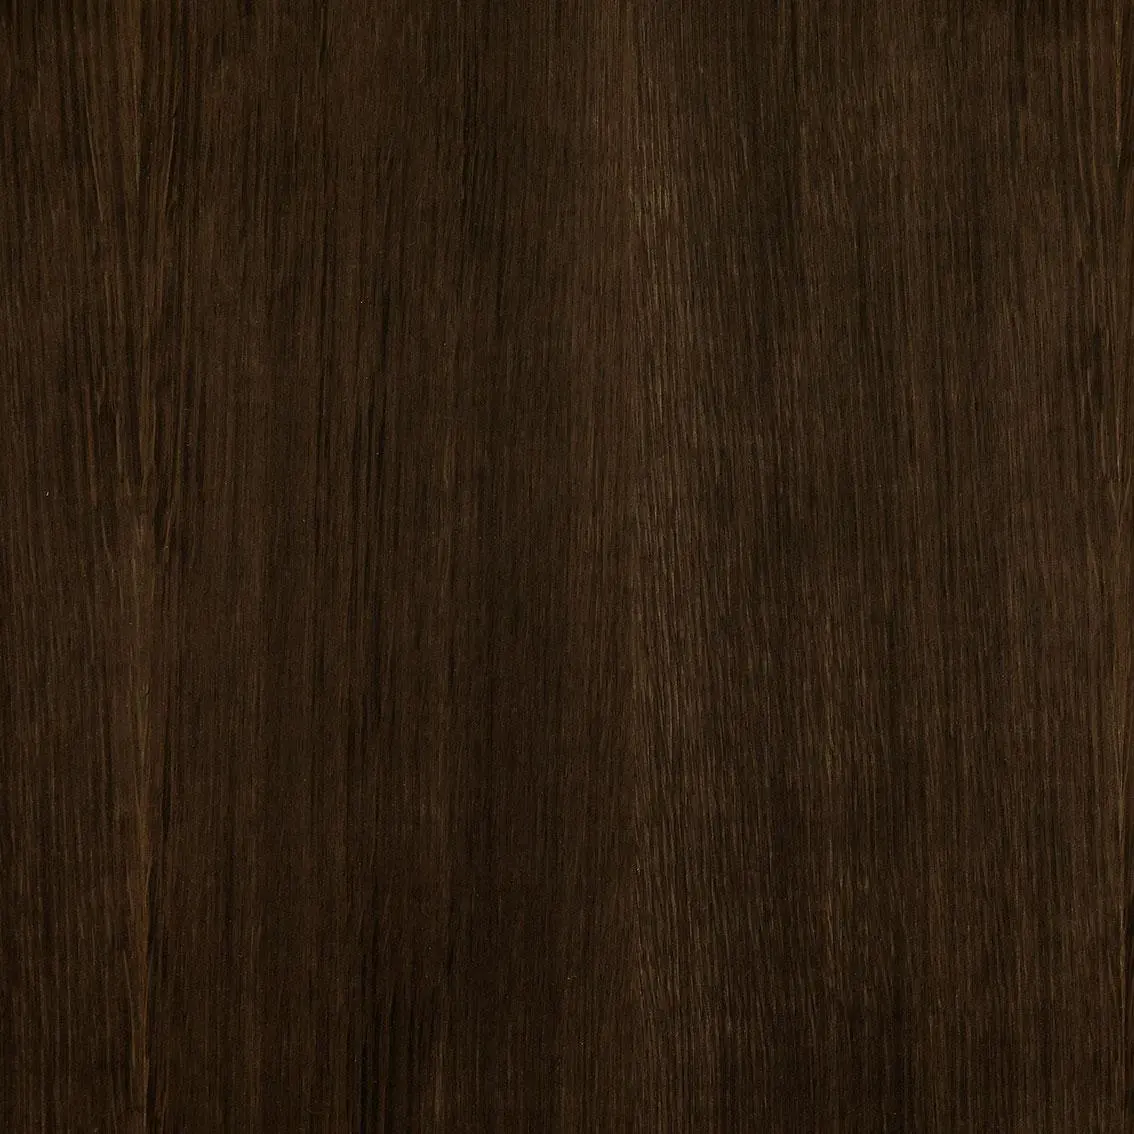 smoked oak finish - What is fumed wood flooring